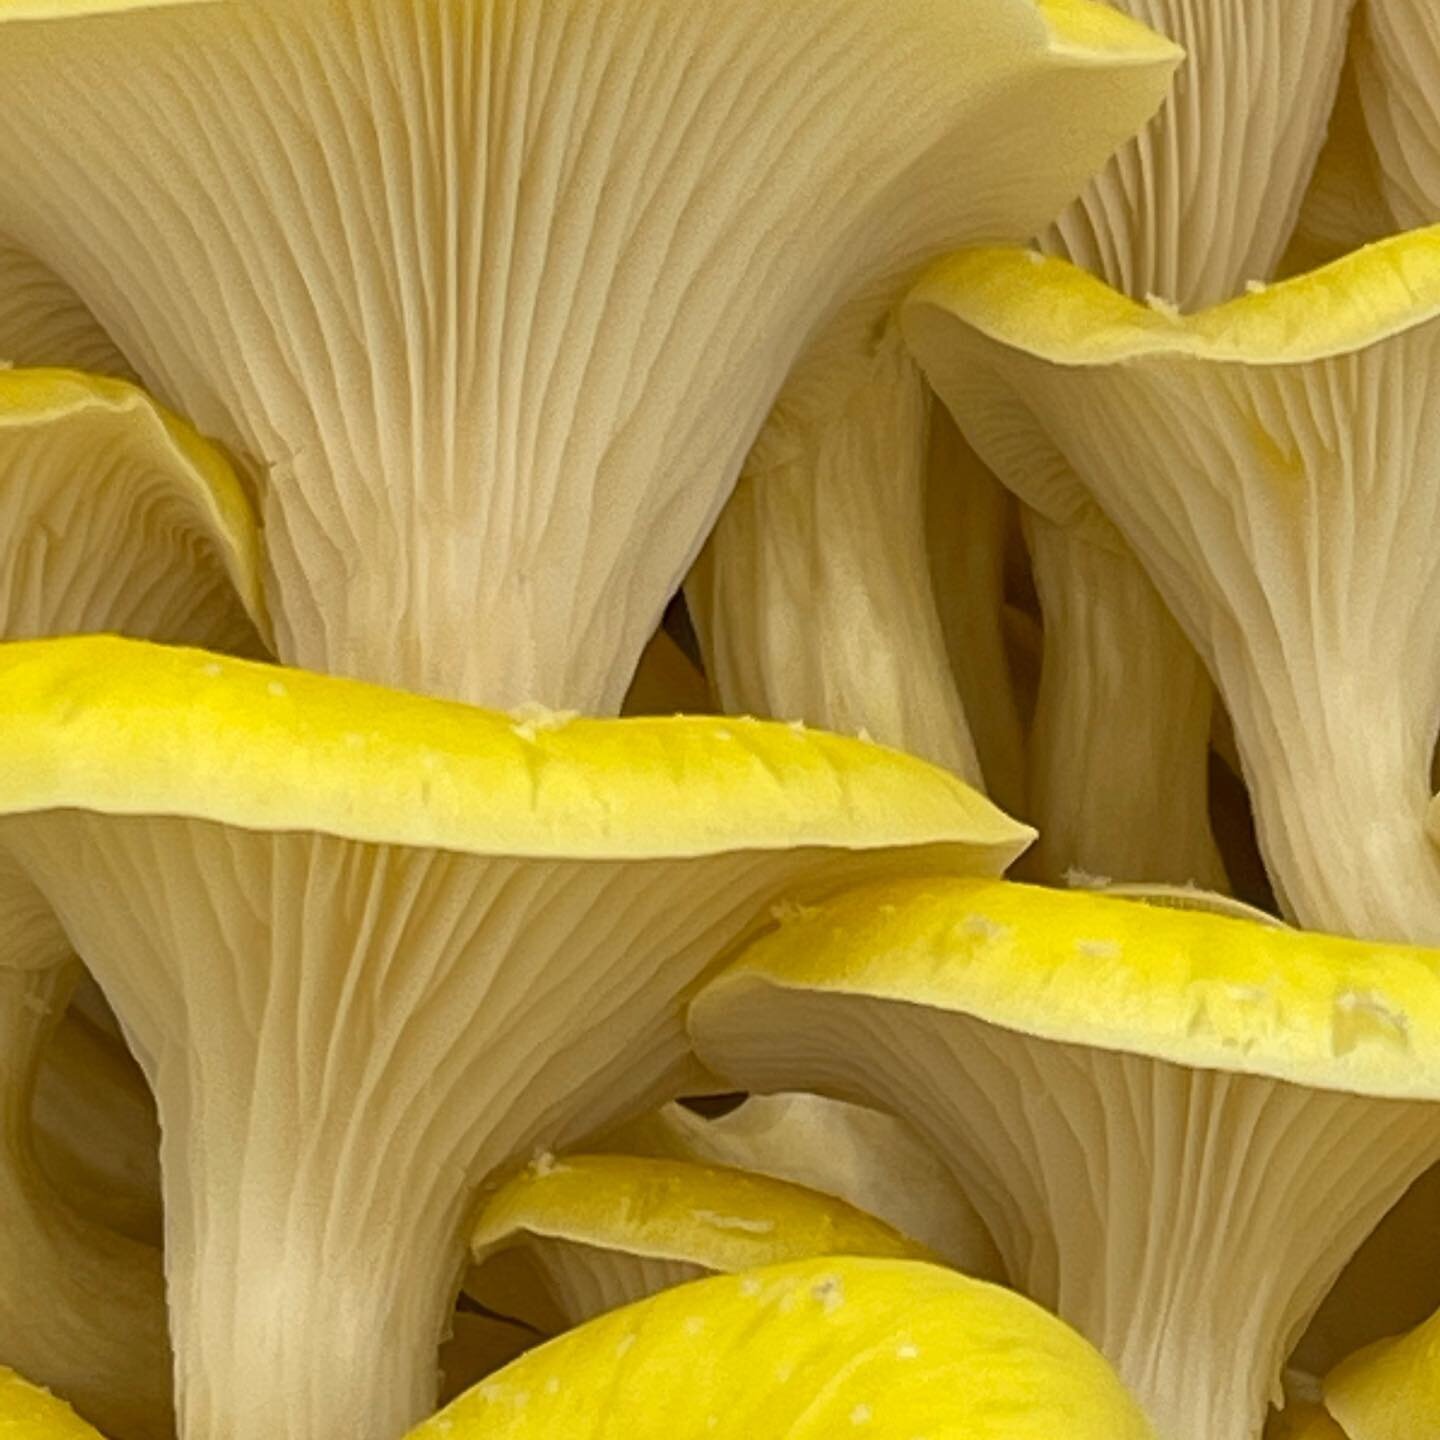 Happy Sunday! ☀️ 

There are always tasks to do, no matter the day, when you are a mushroom producer.

Even so, we enjoy finding some time to really appreciate the beauty of these amazing organisms that we cultivate. 💛

These golden oyster mushroom 